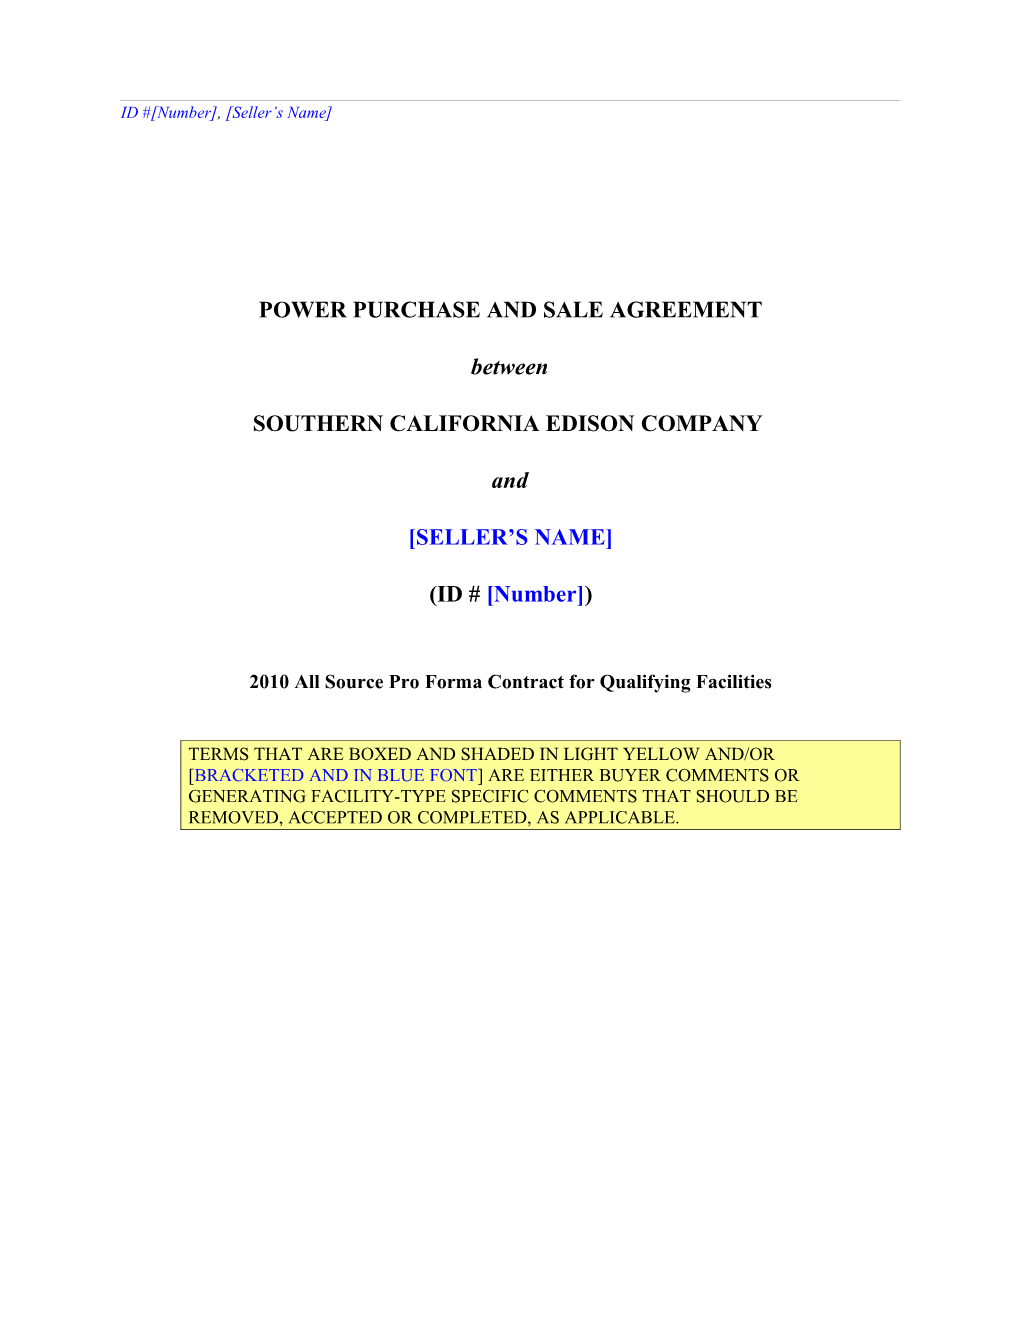 Power Purchase and Sale Agreement